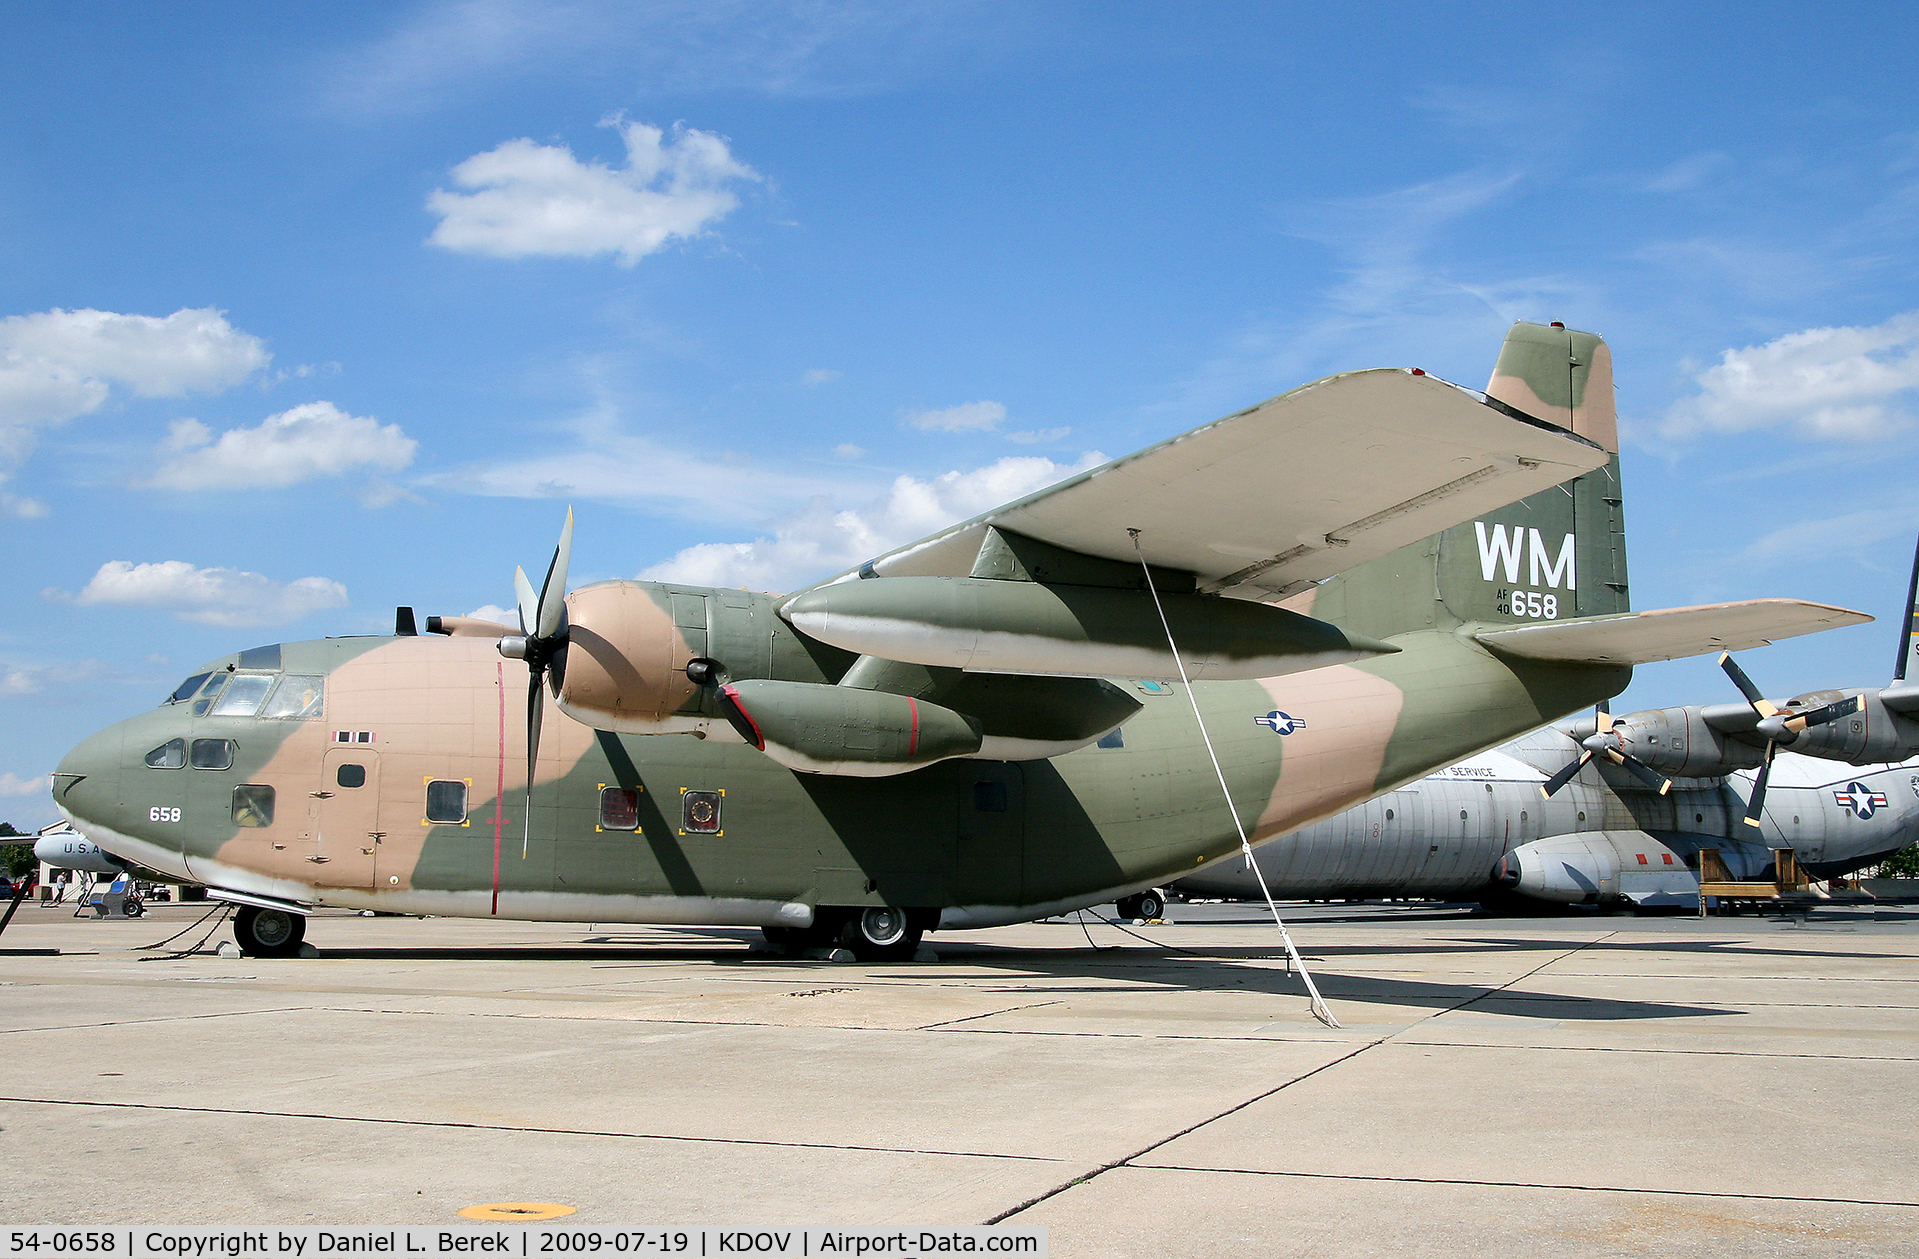 54-0658, 1954 Fairchild C-123K Provider C/N 20107, This provider has been preserved in Vietnam-era camouflage.